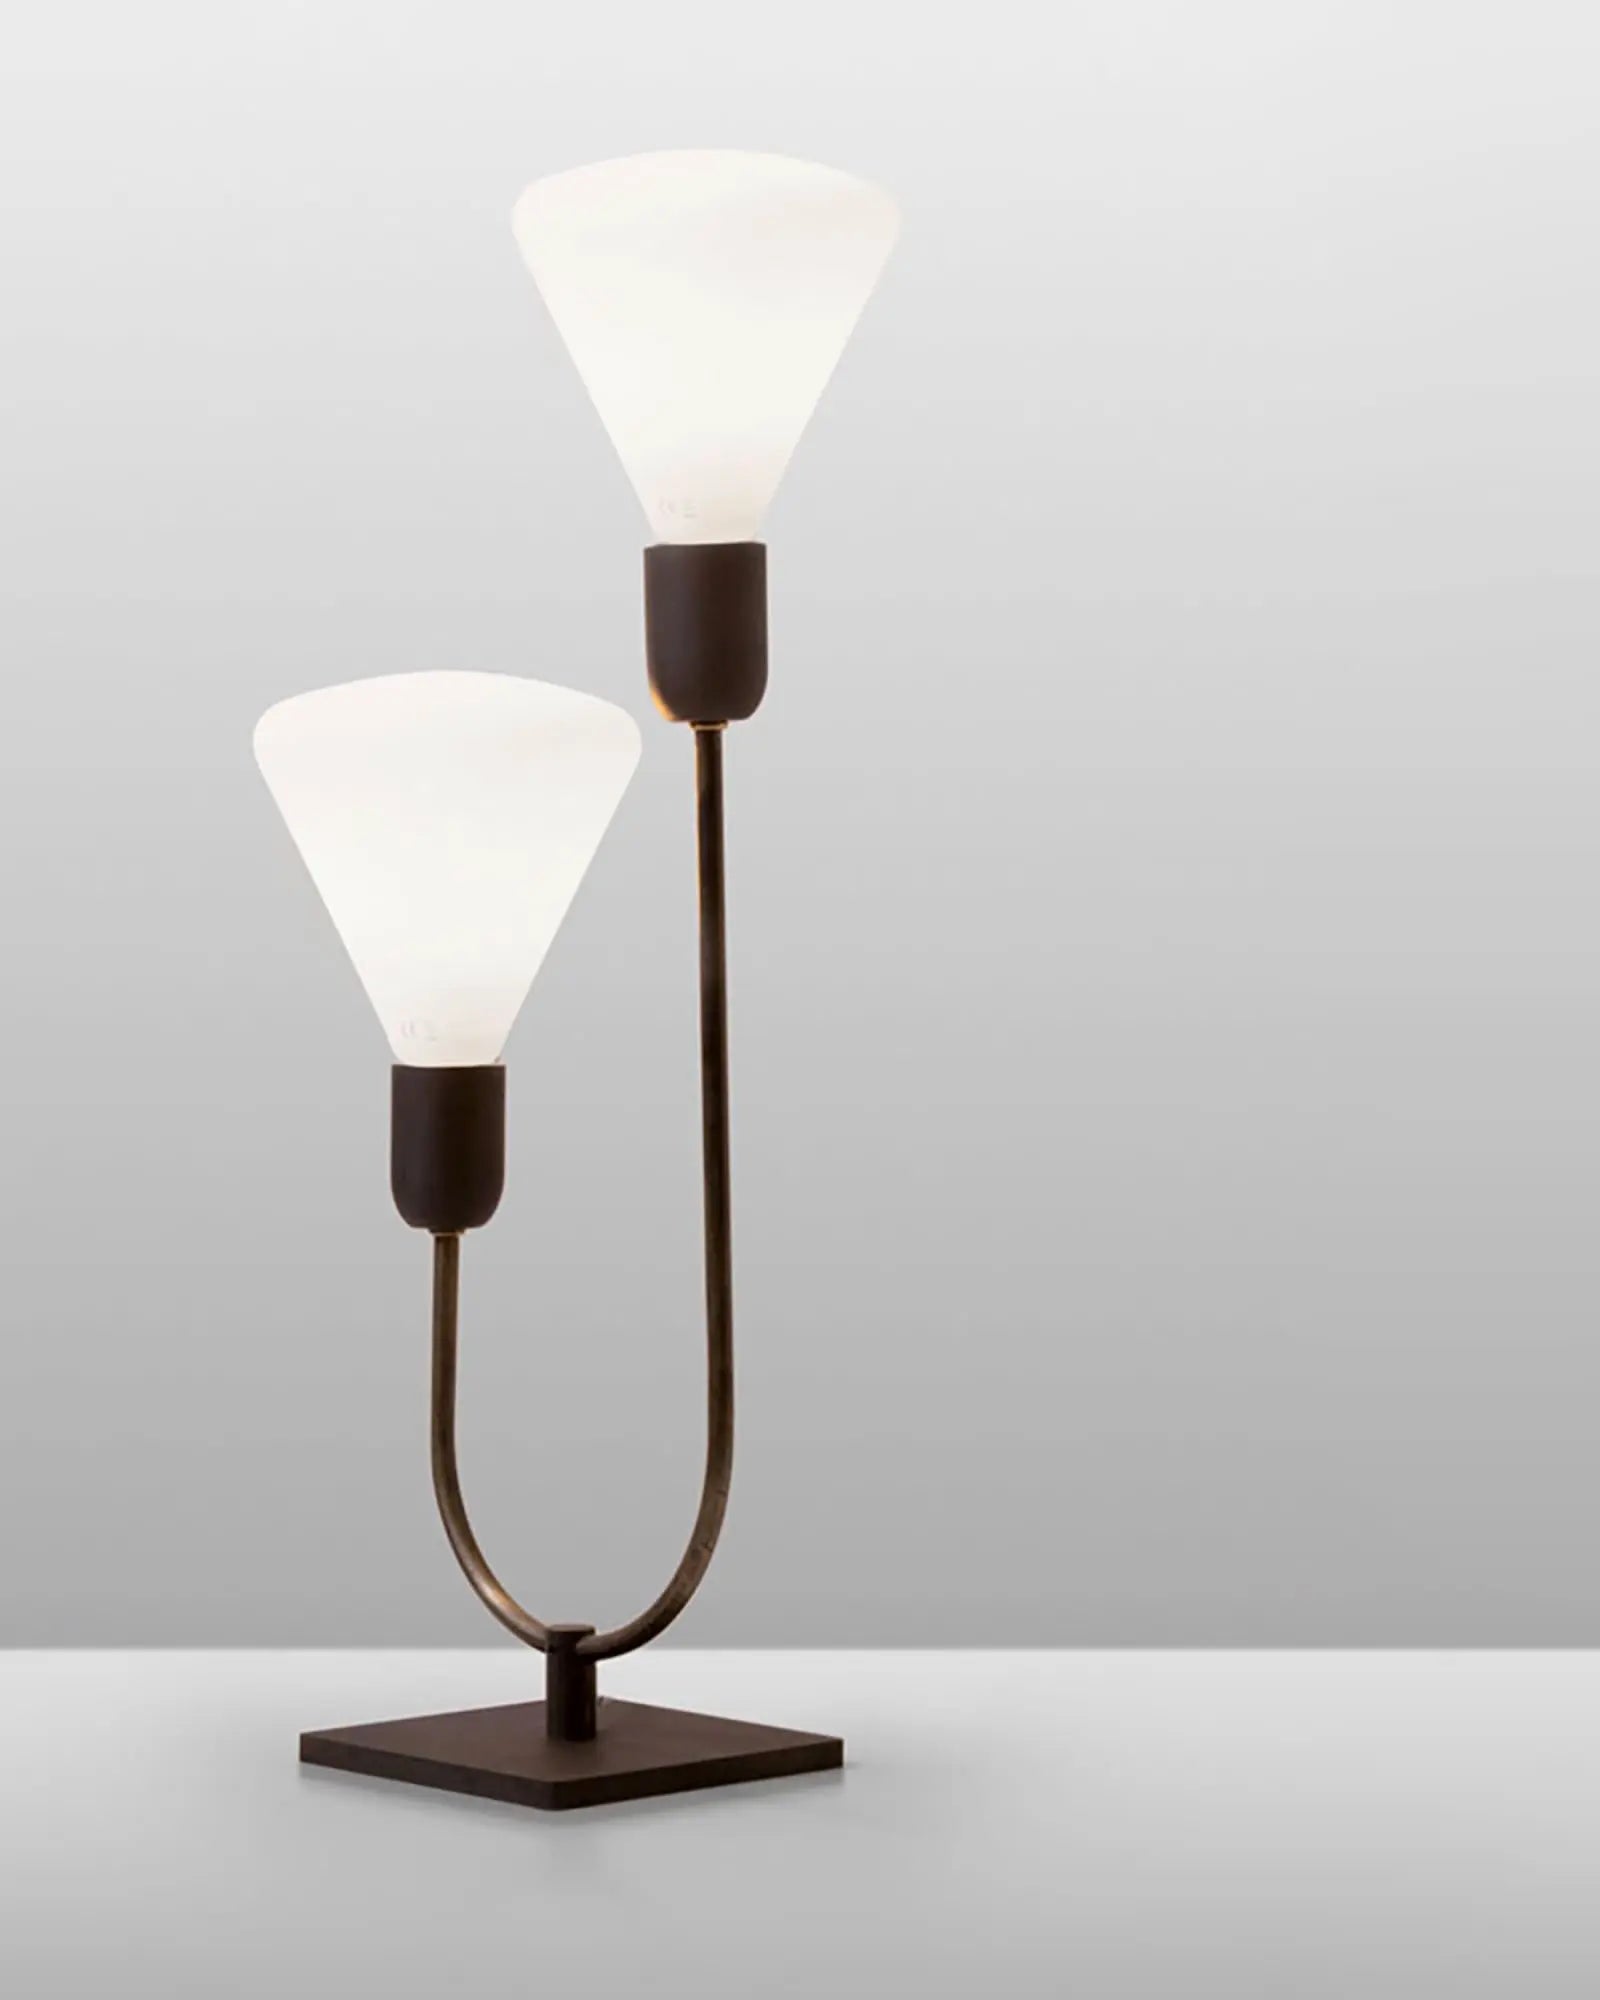 Smith 2 table lamp